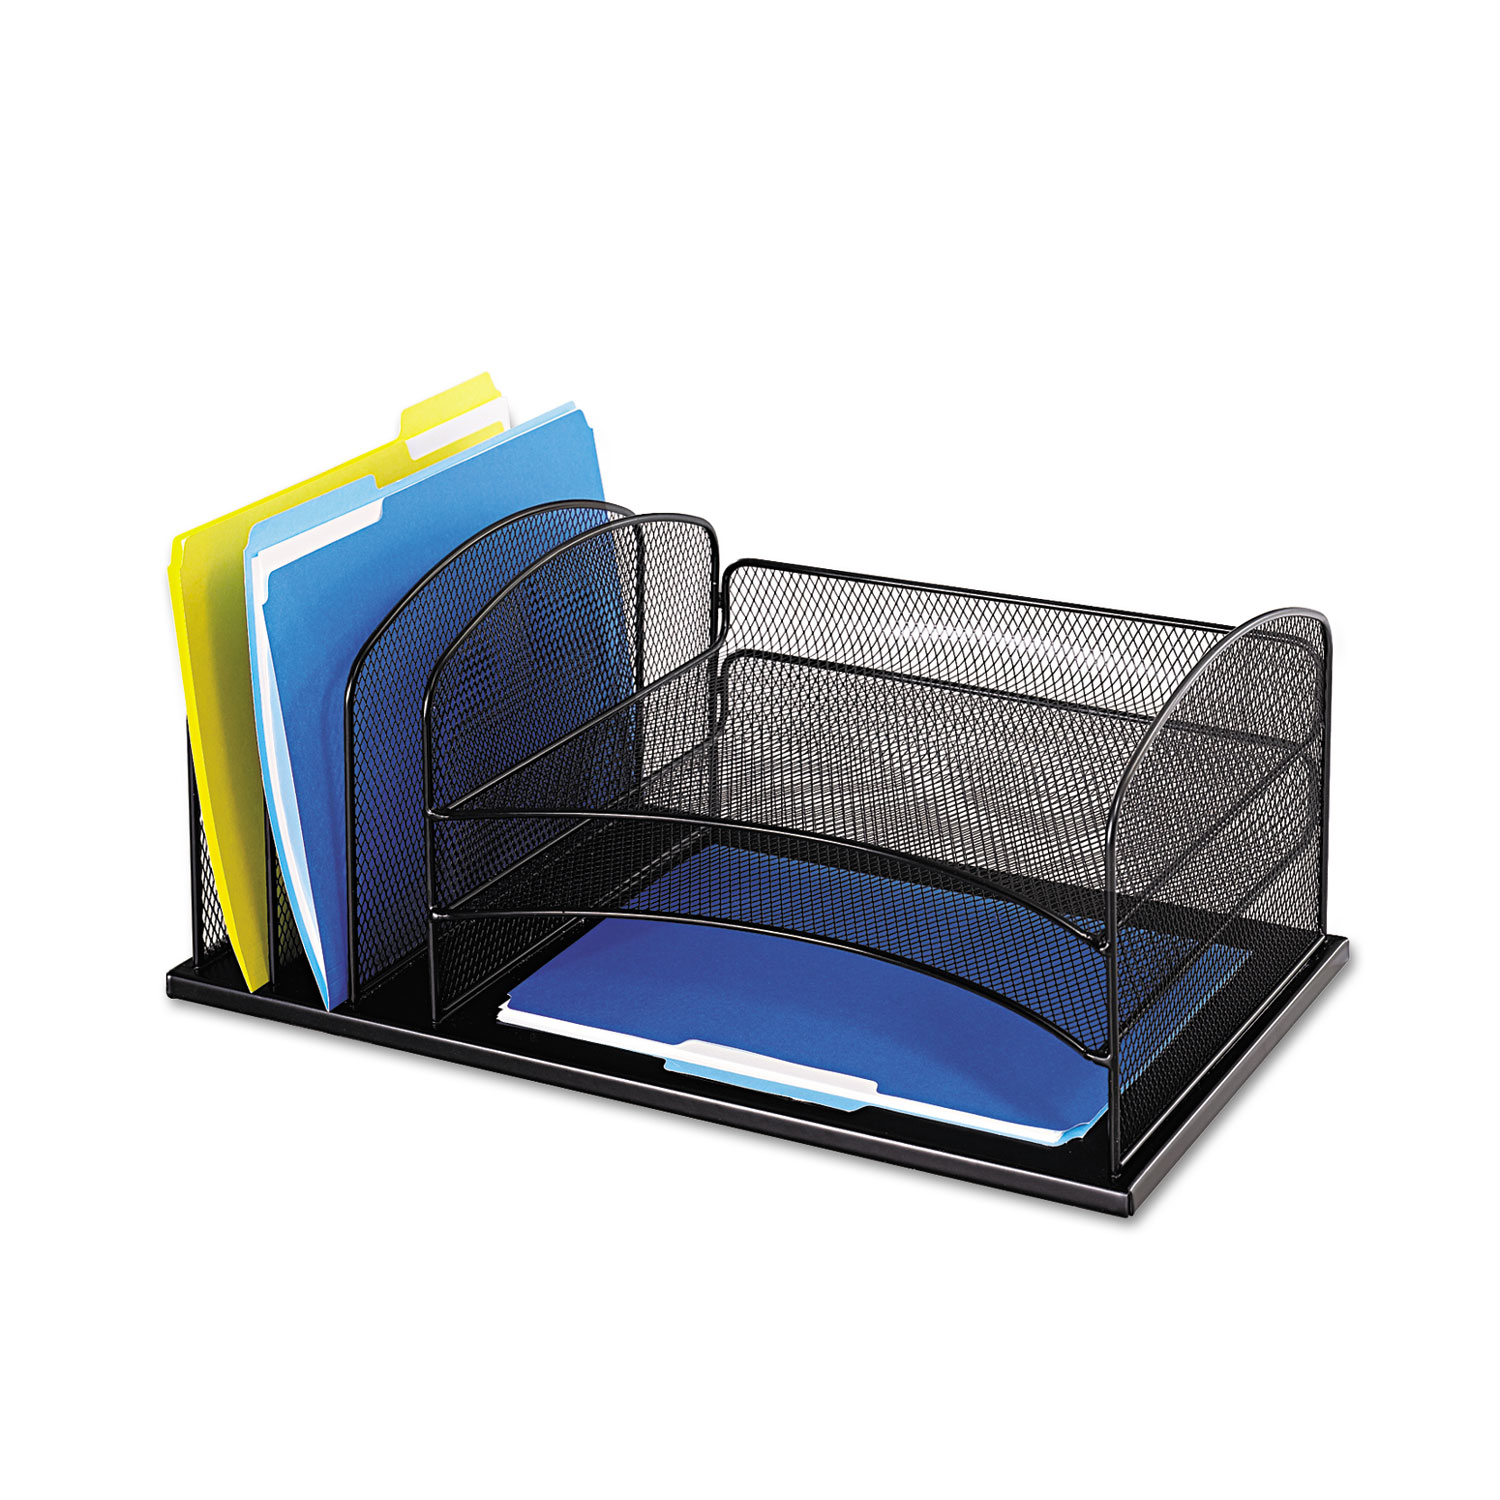 Onyx Desk Organizer with Three Horizontal and Three Upright Sections, Letter Size Files, 19.5" x 11.5" x 8.25", Black